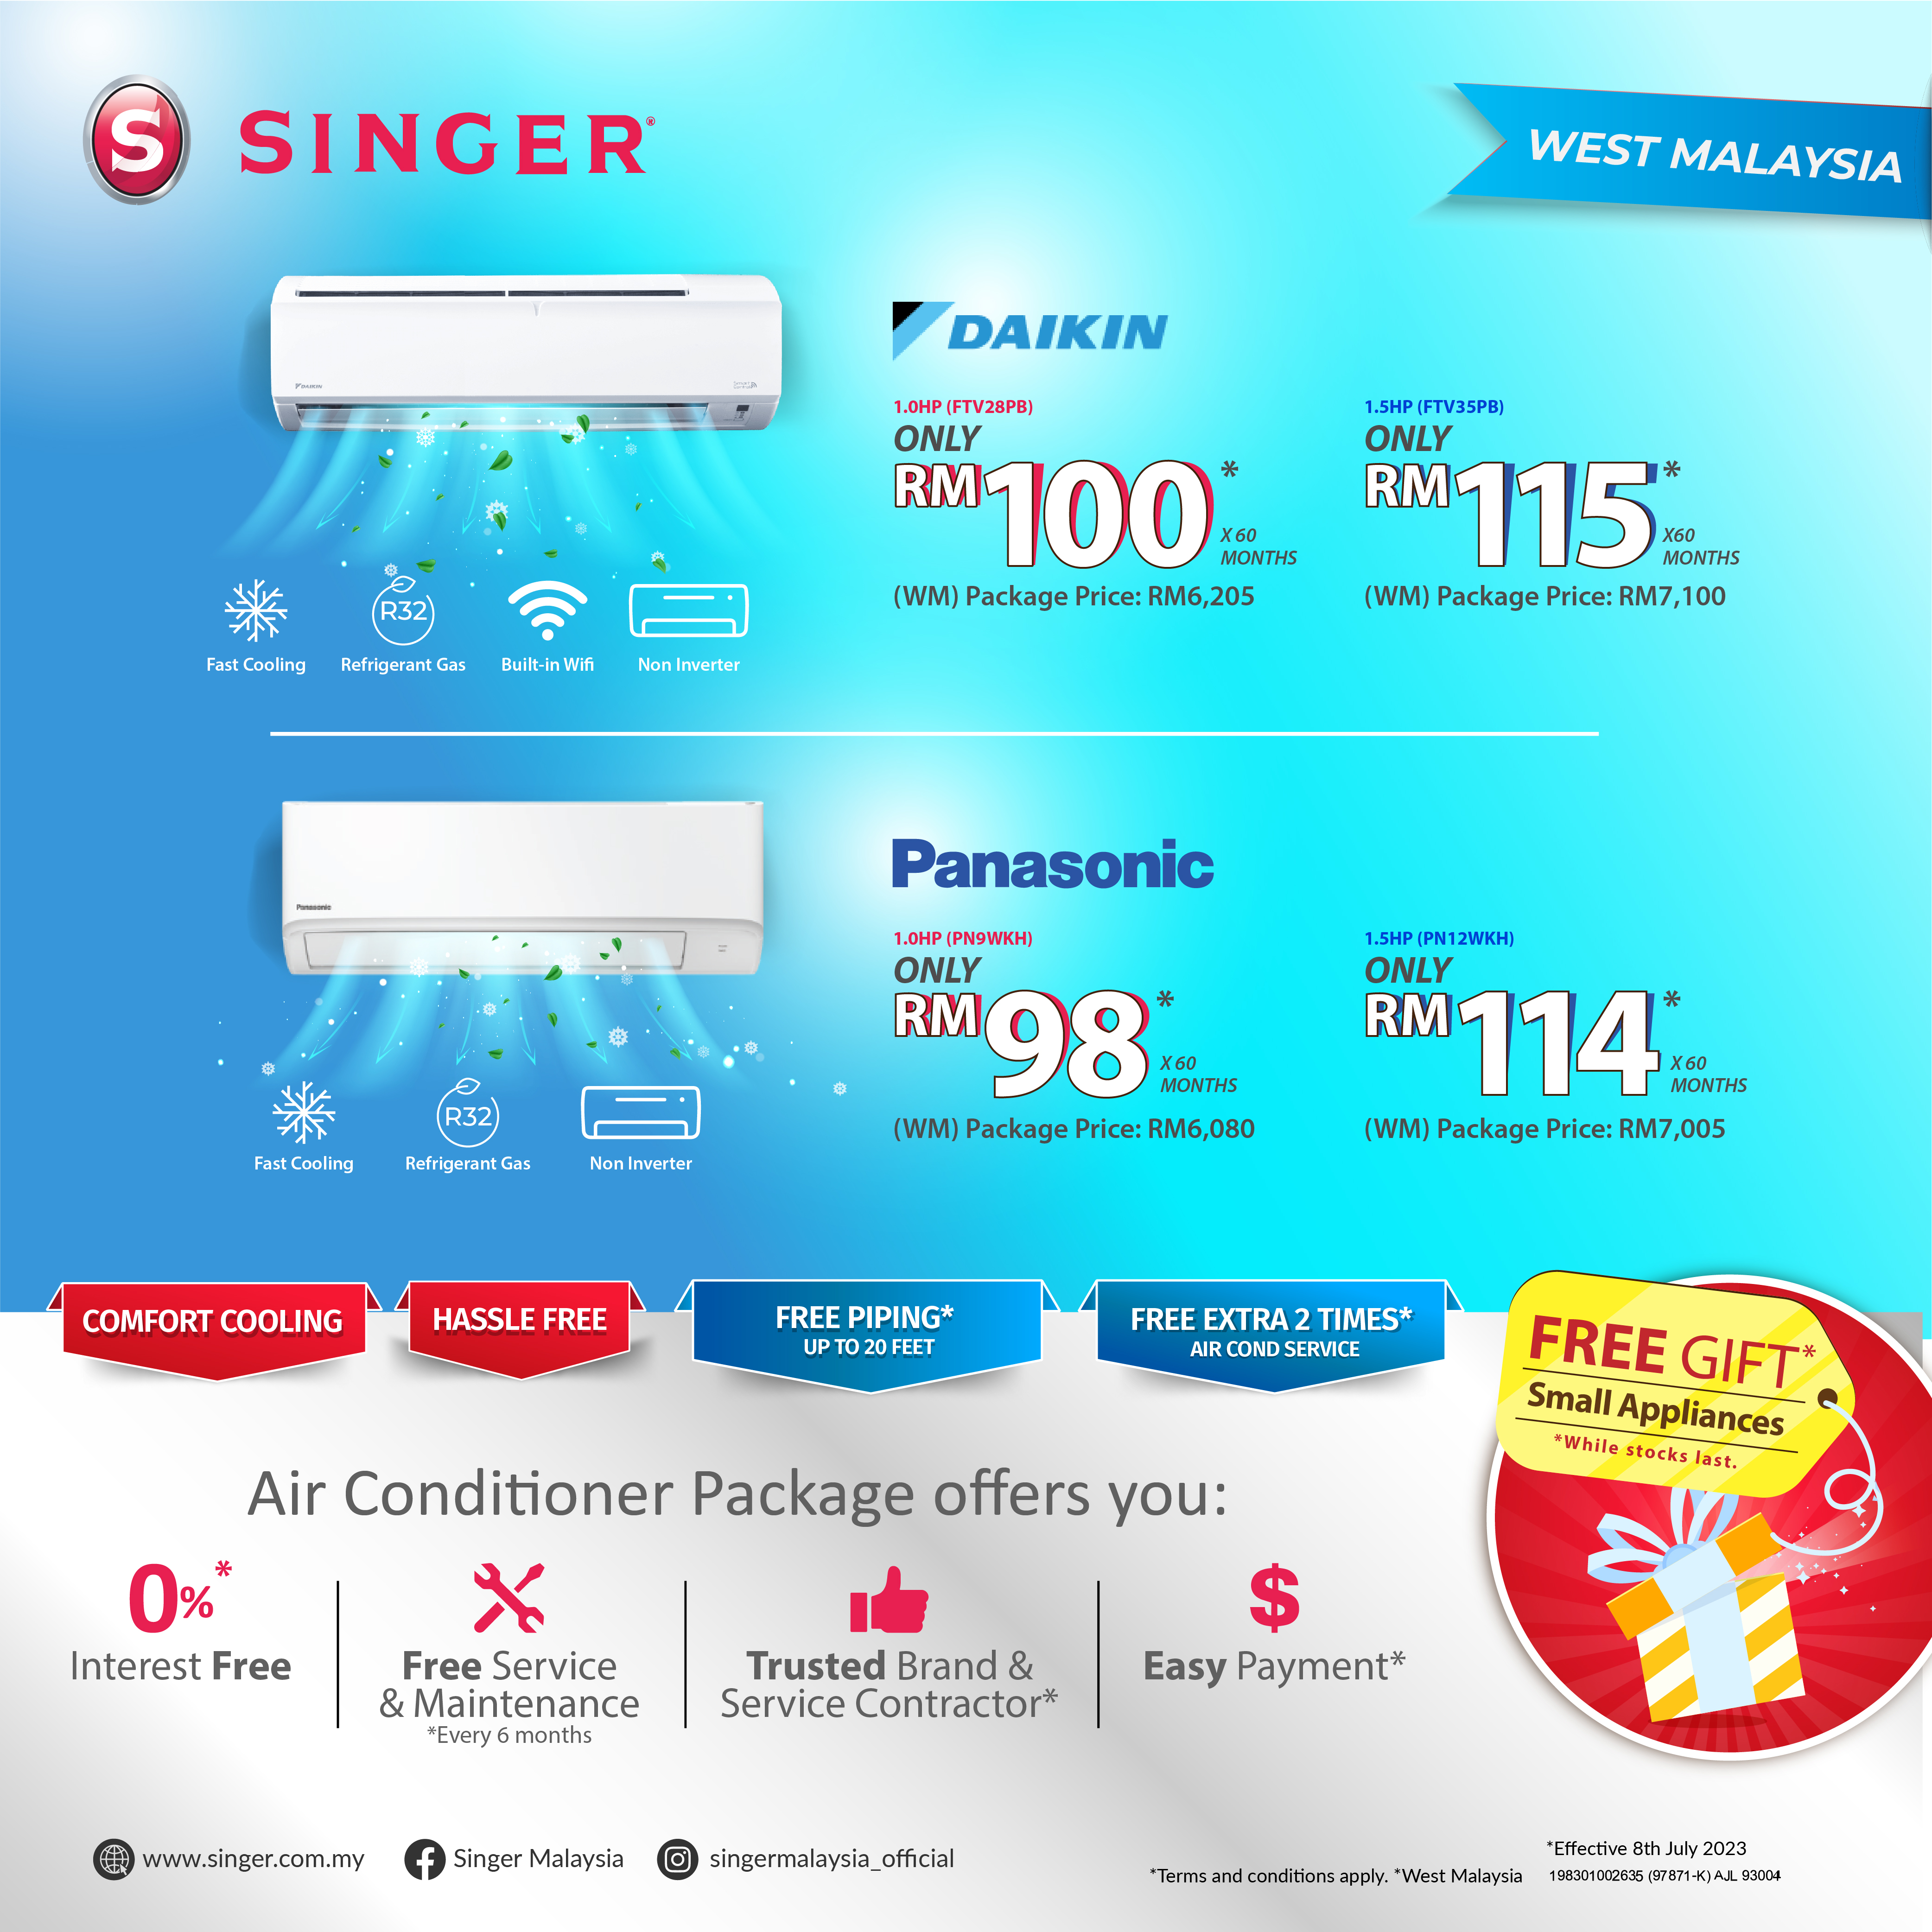 Stay cool and hassle free with a DAIKIN or PANASONIC air conditioner for your home.